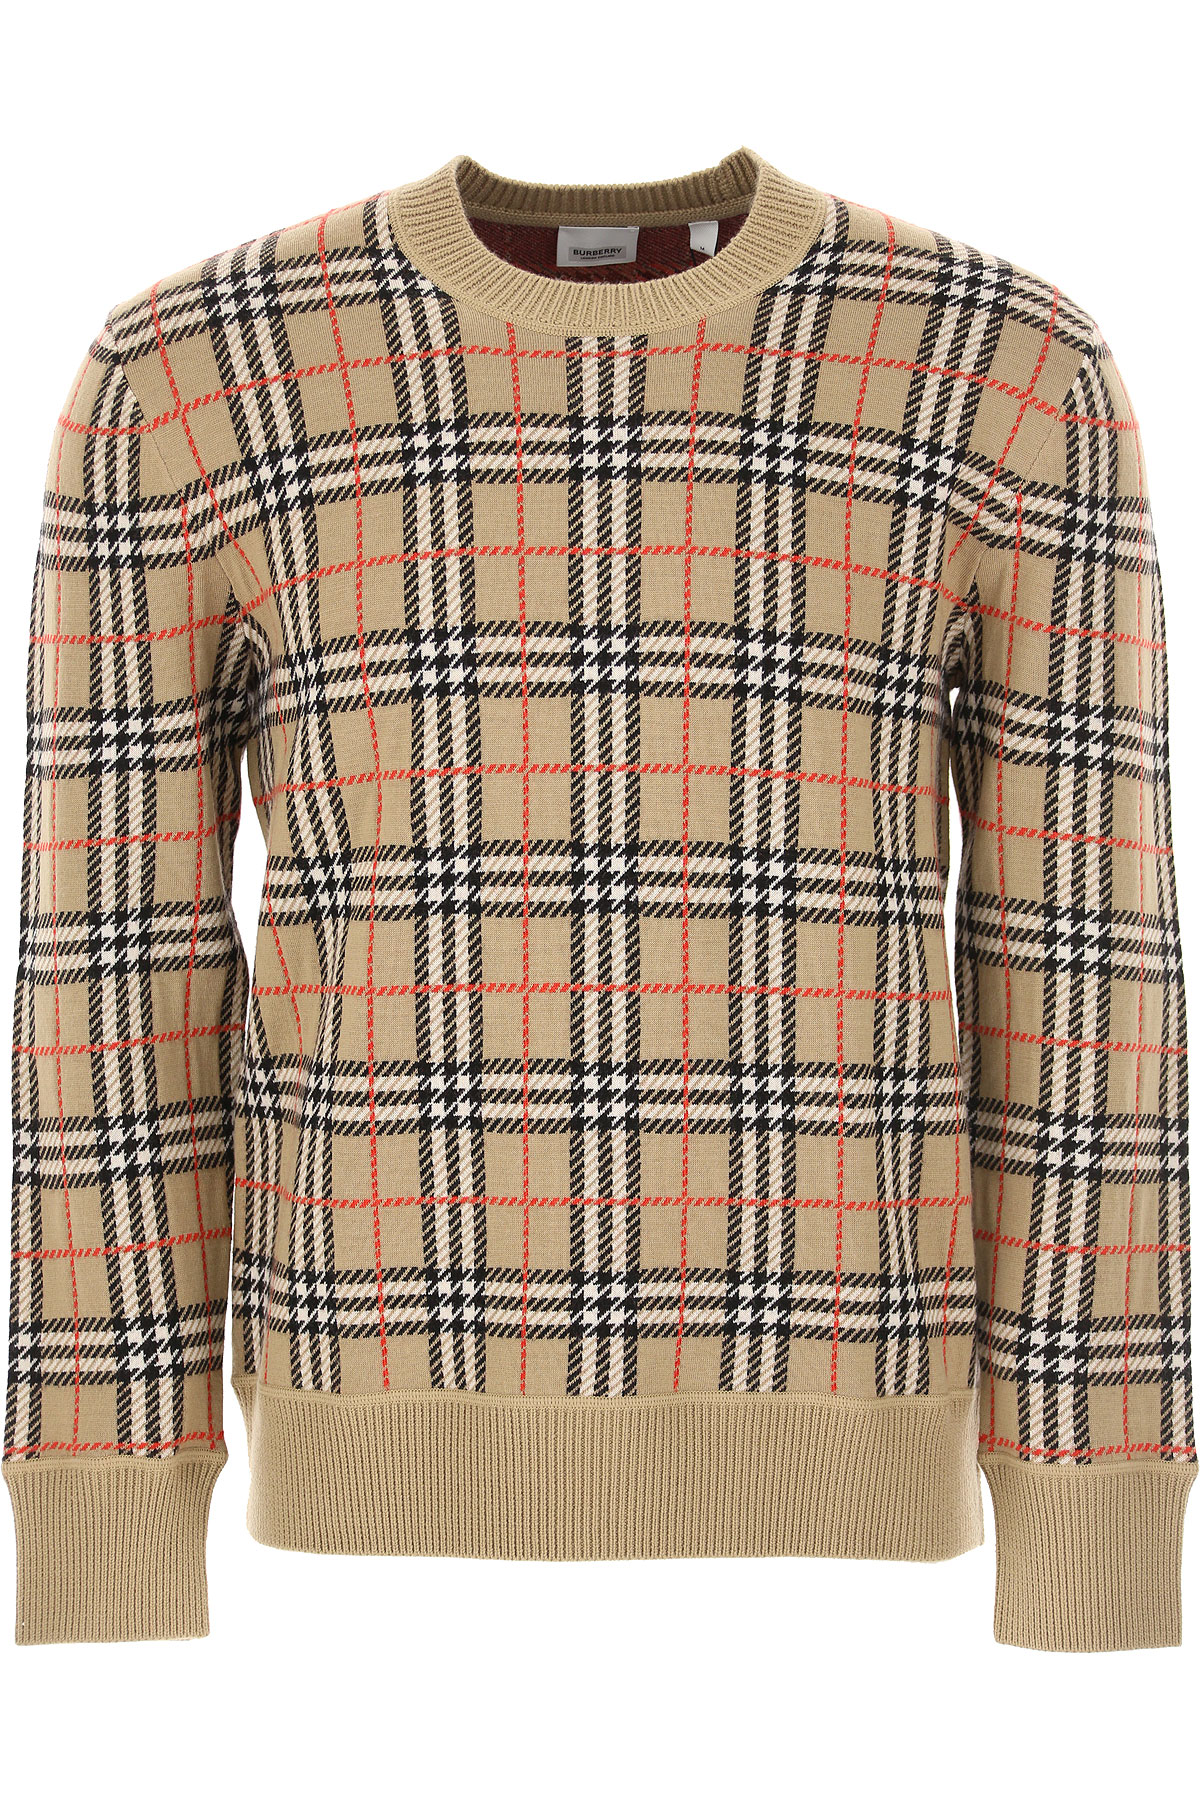 Mens Clothing Burberry, Style code: 8021347-a7026-